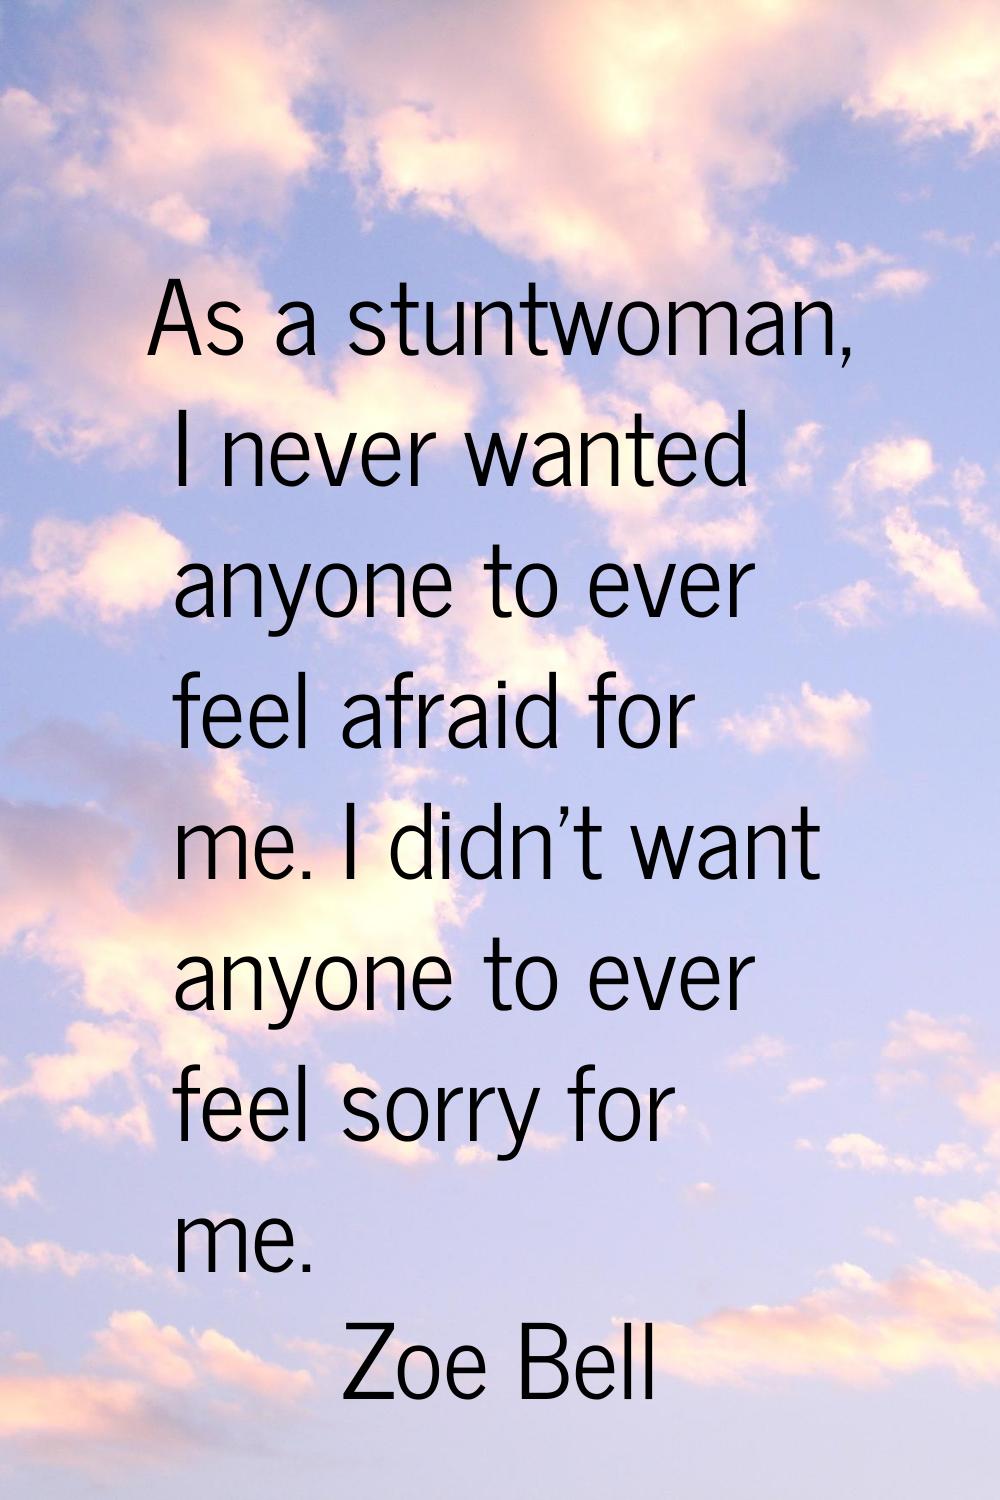 As a stuntwoman, I never wanted anyone to ever feel afraid for me. I didn't want anyone to ever fee